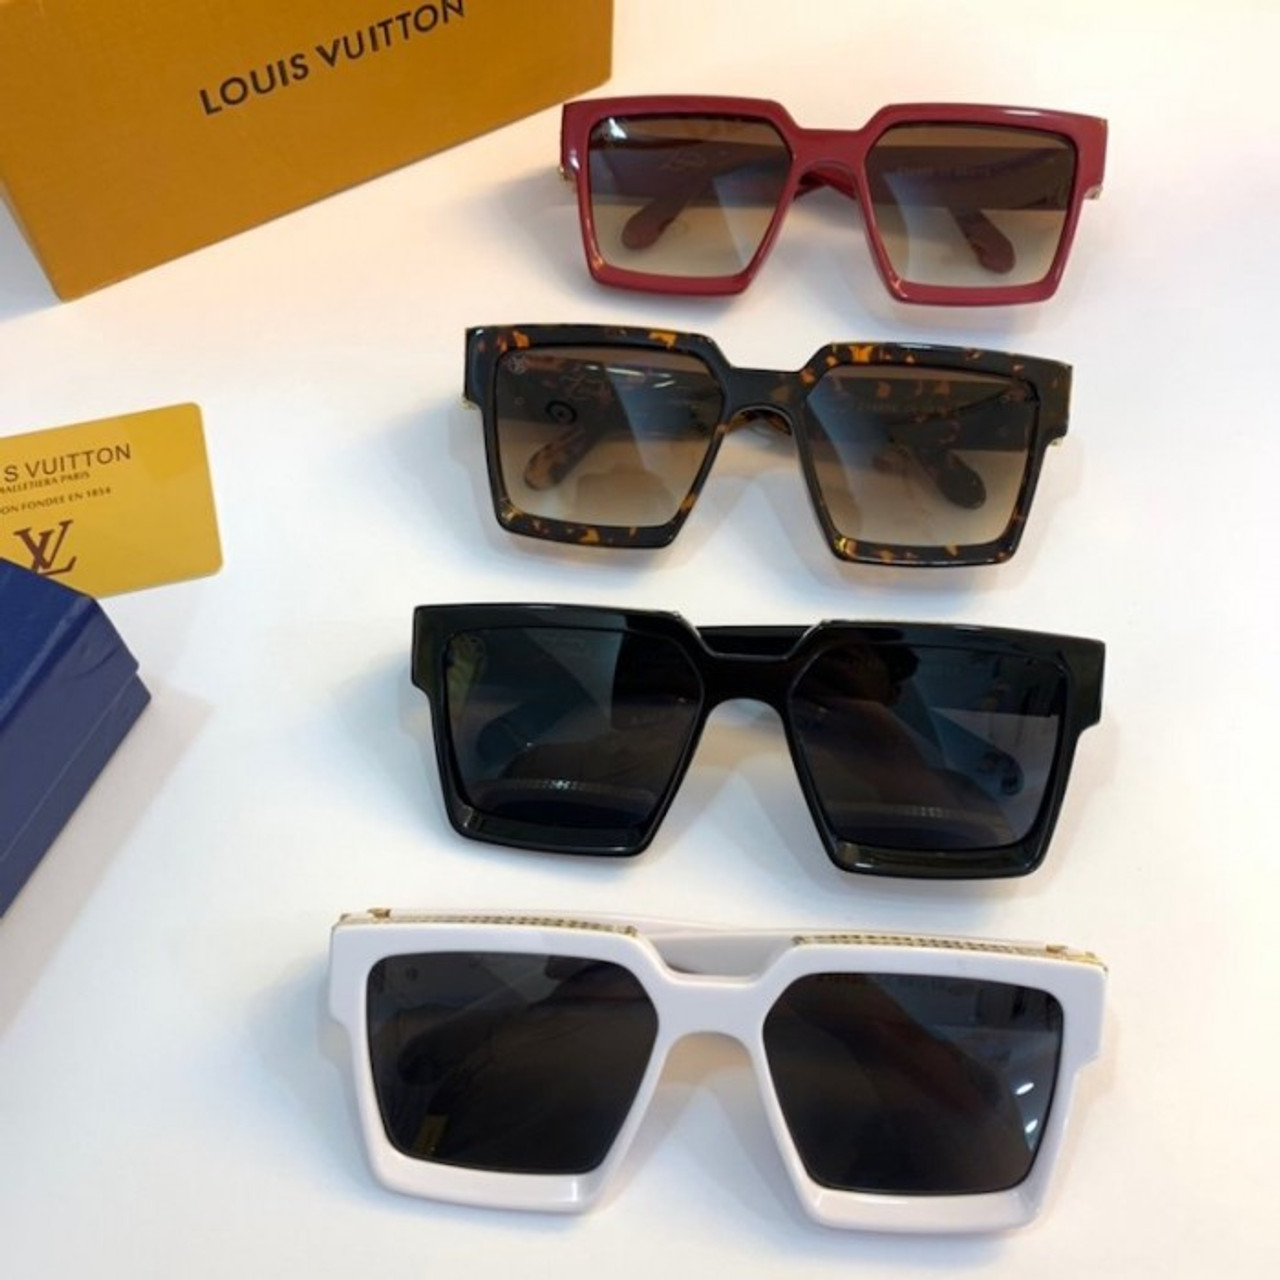 StockX on Instagram: Louis Vuitton's 1.1 Millionaire Sunglasses give a nod  to the eyewear trends of Al Capone's Chicago, hometown of Artistic Director  Virgil Abloh. Coming in a range of colorways, each